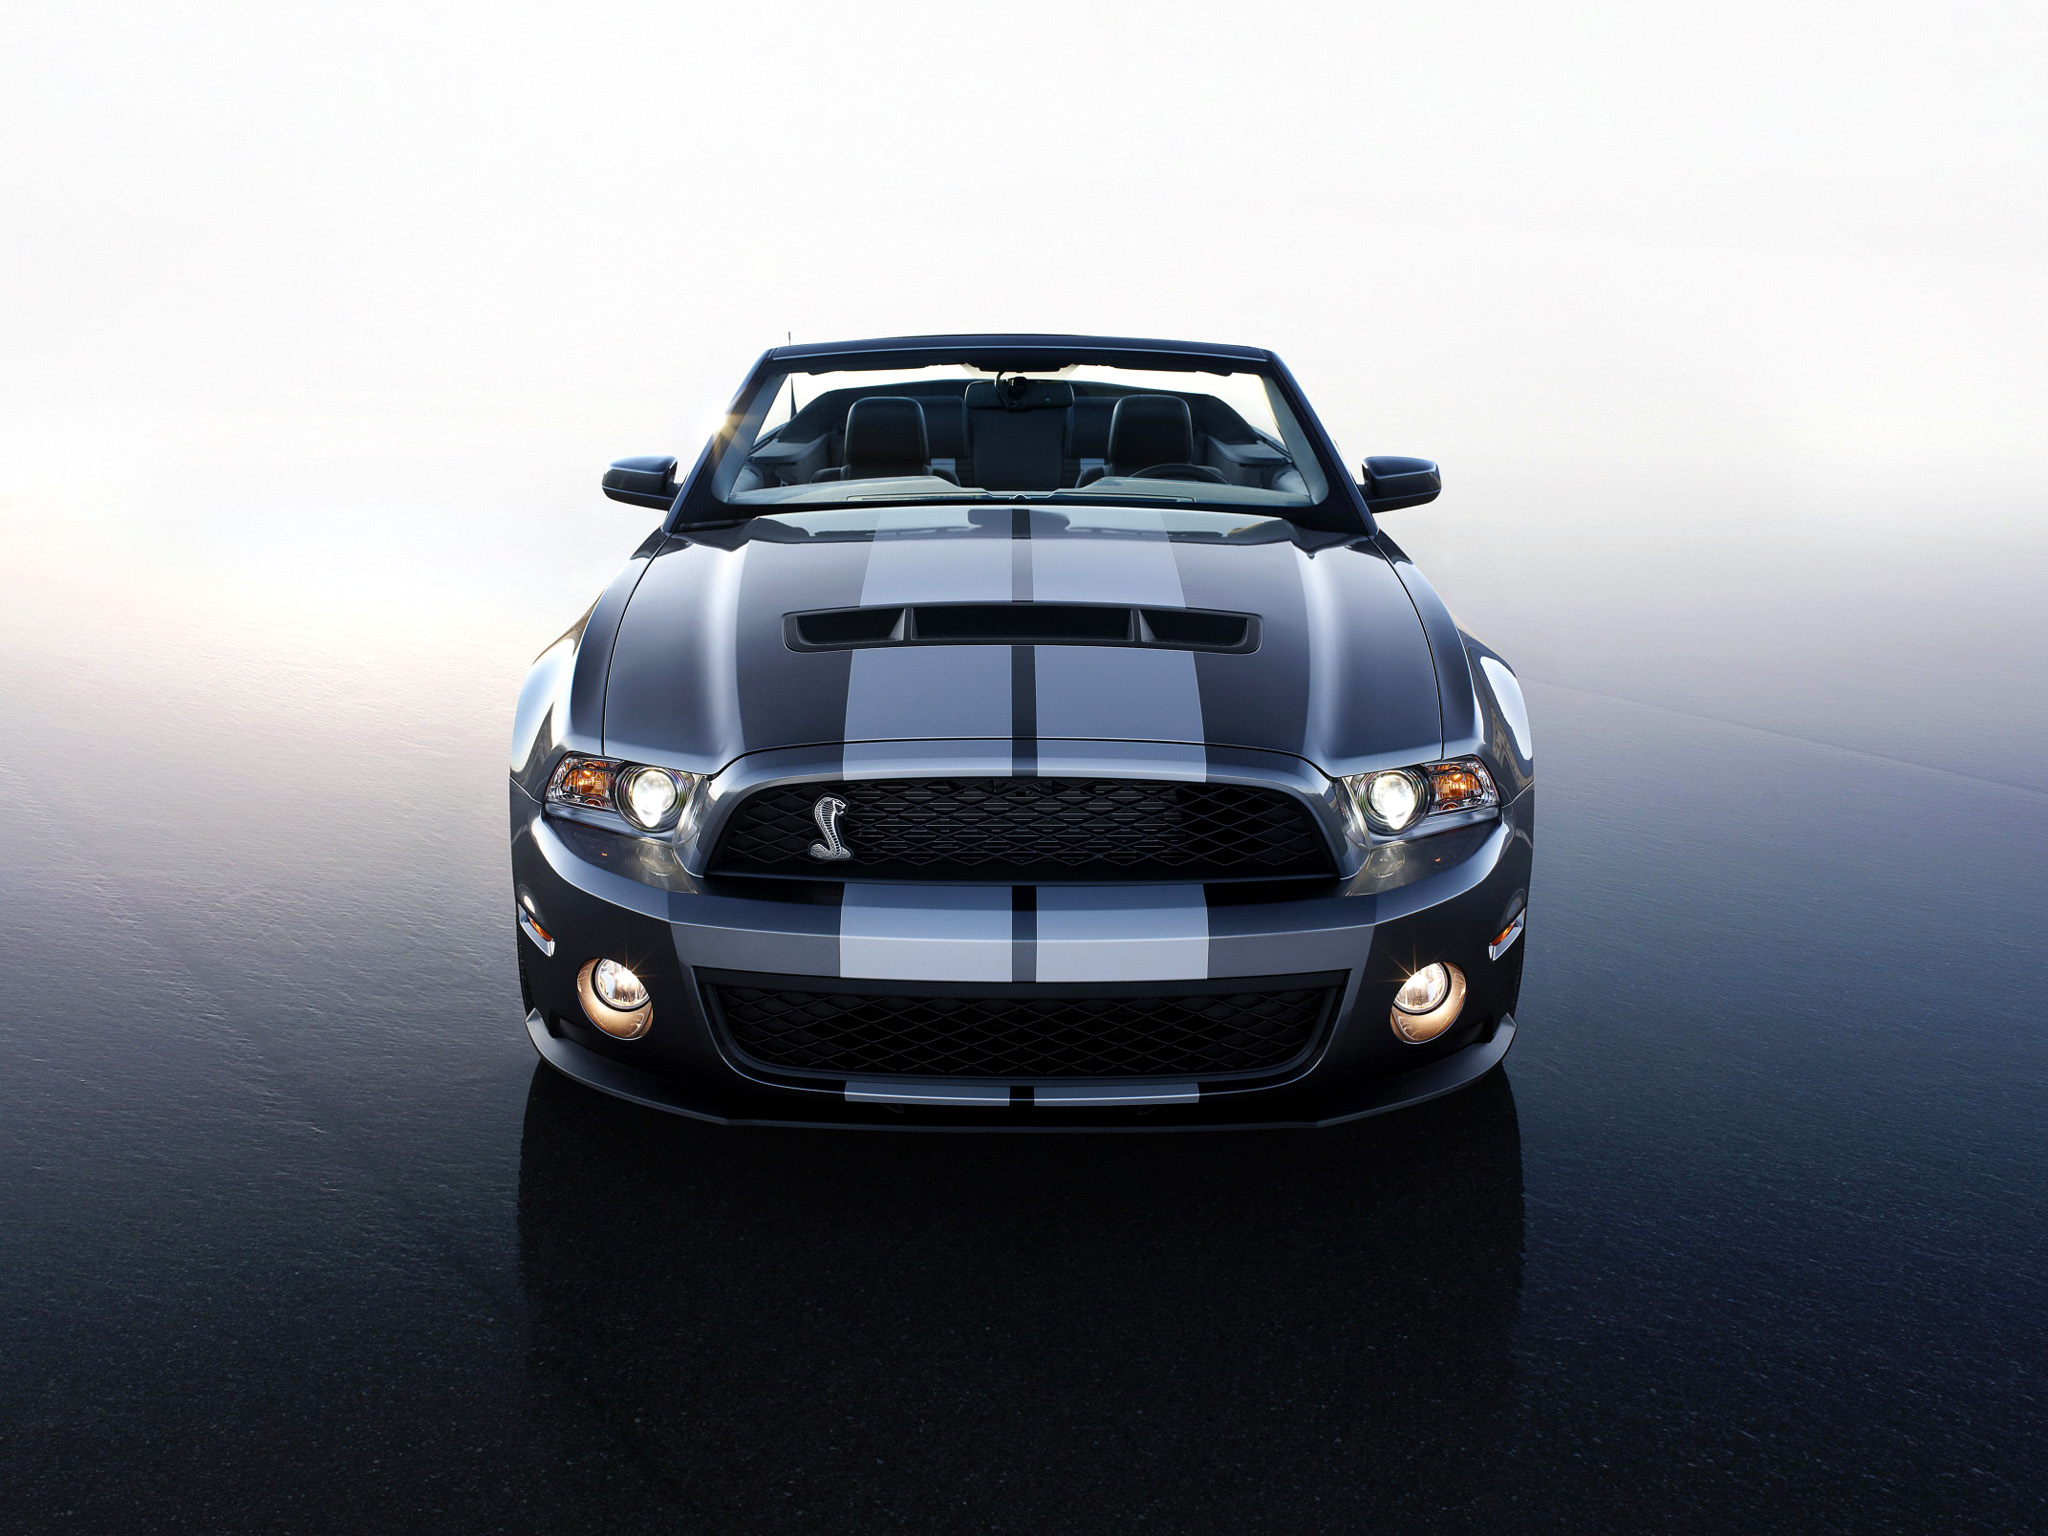 2009, Shelby, Gt500, Convertible, Svt, Ford, Mustang, Muscle, Ff Wallpaper